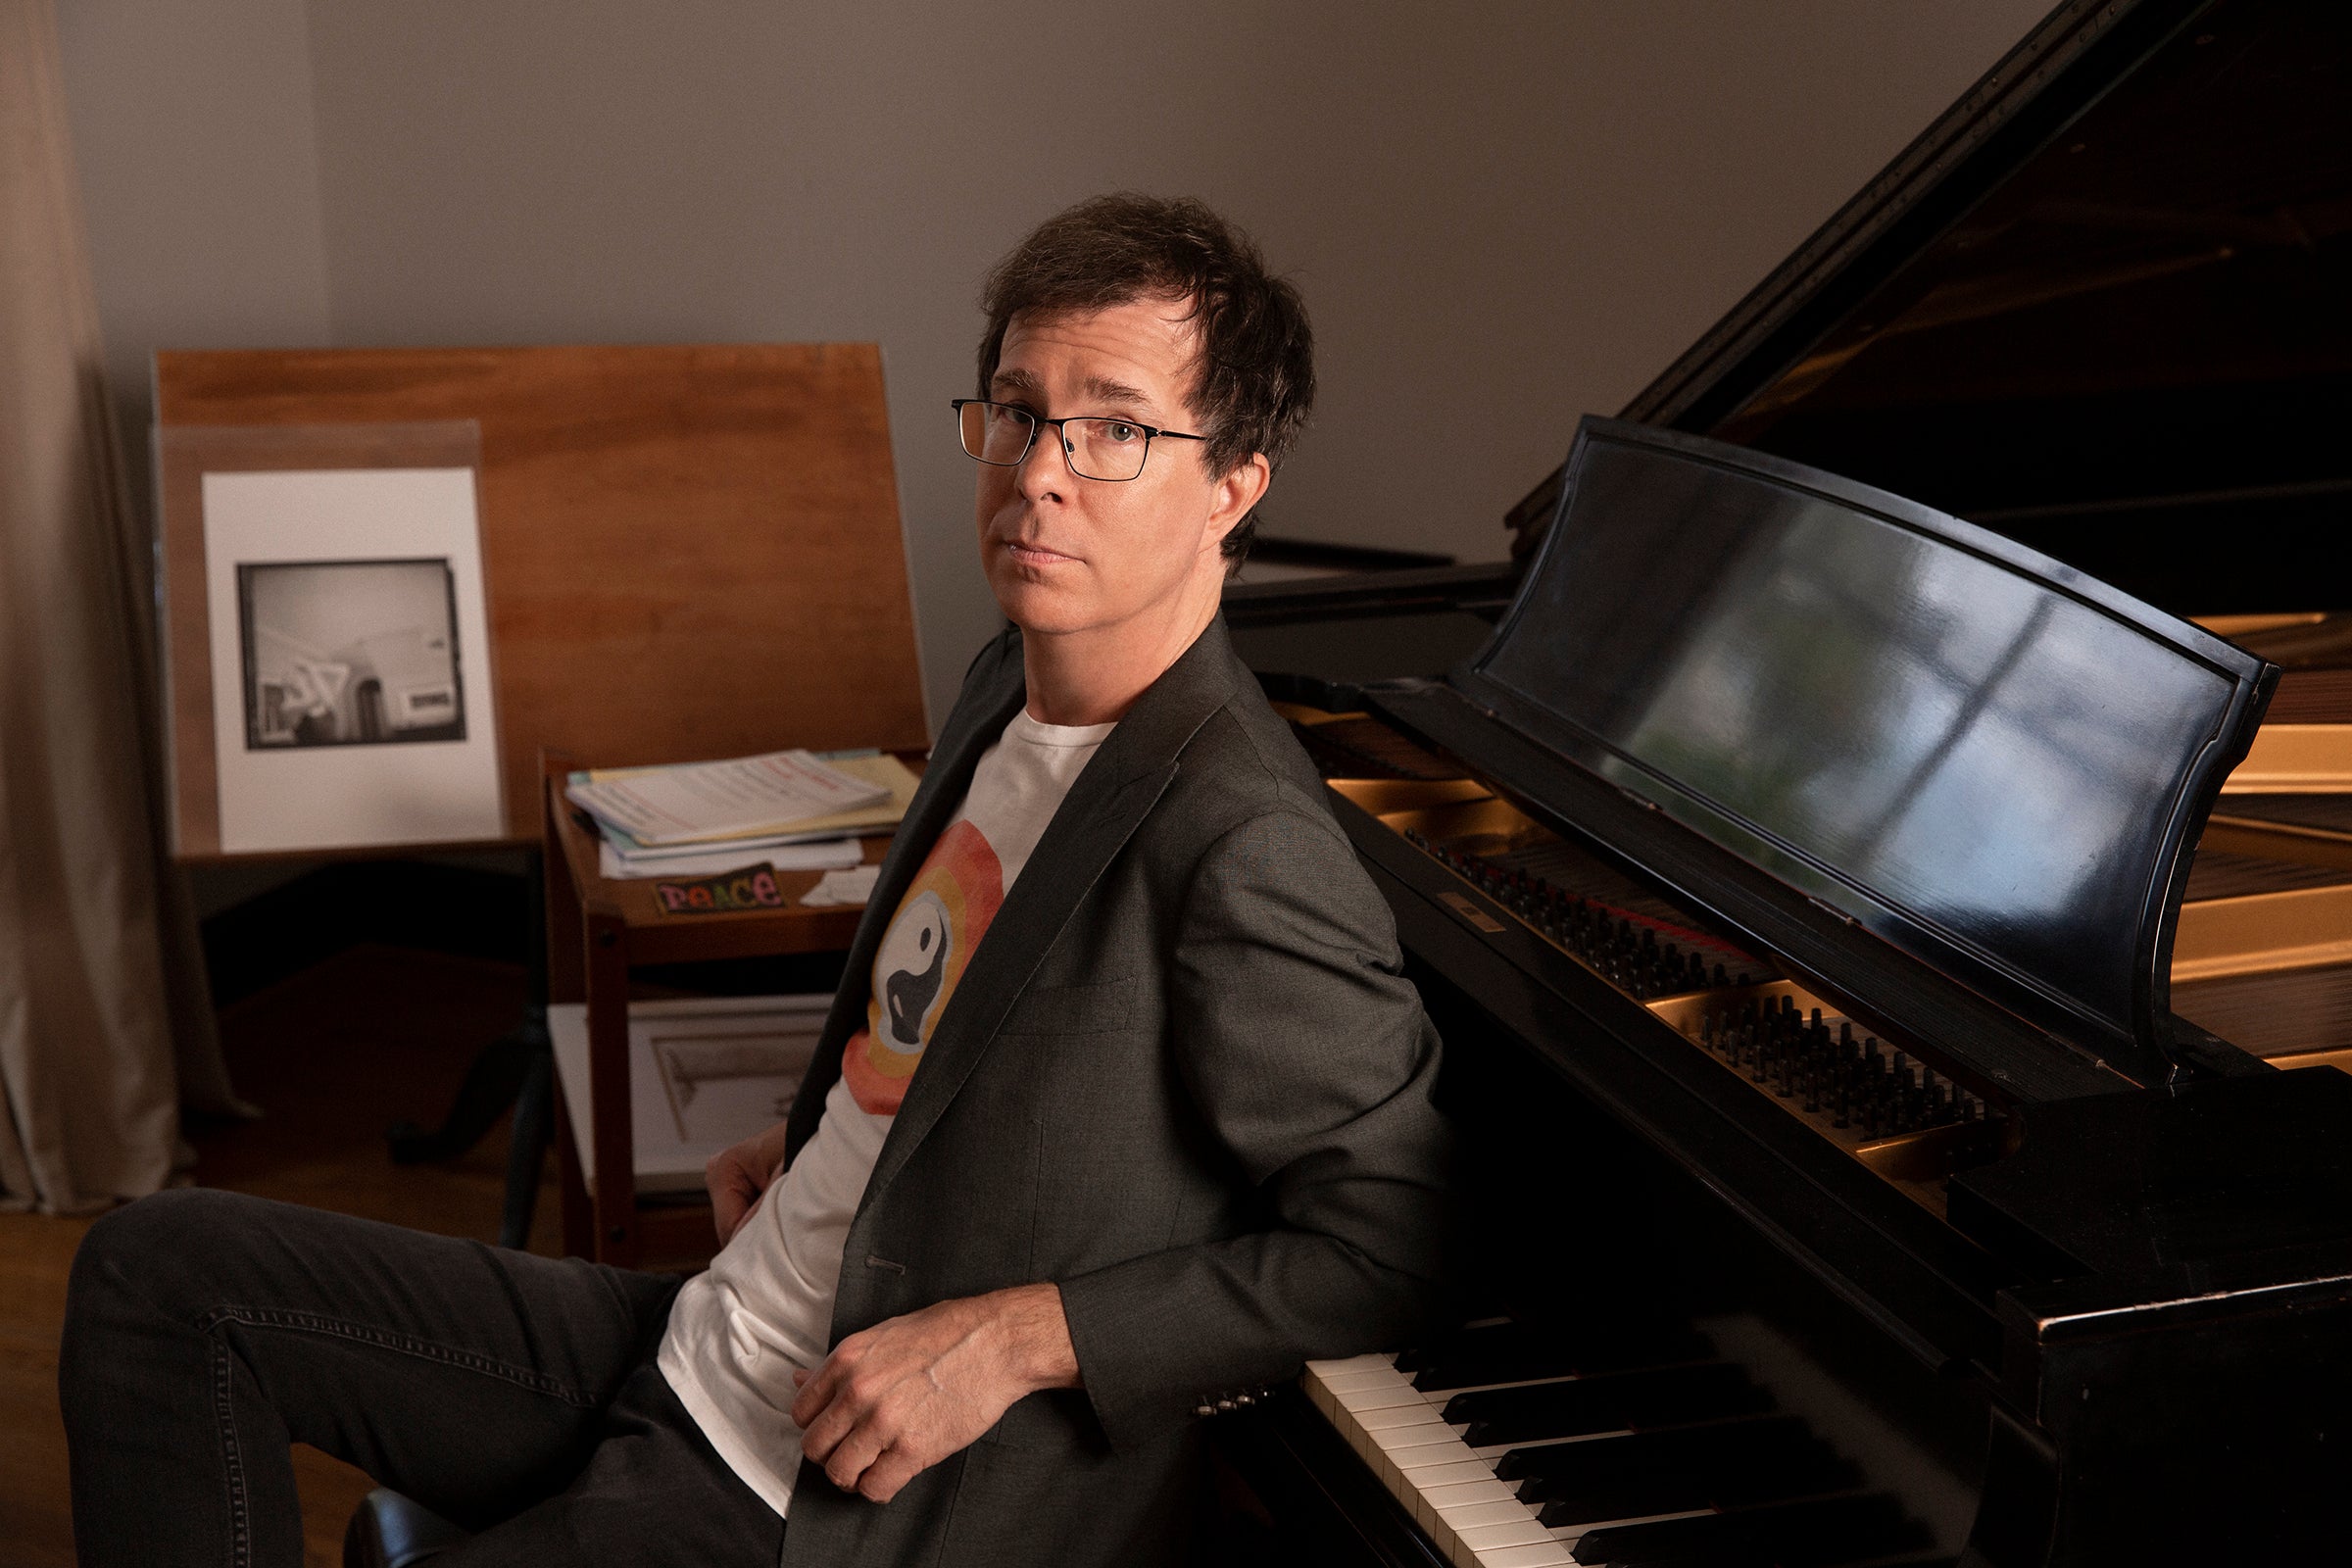 Image used with permission from Ticketmaster | Ben Folds - What Matters Most UK Tour tickets